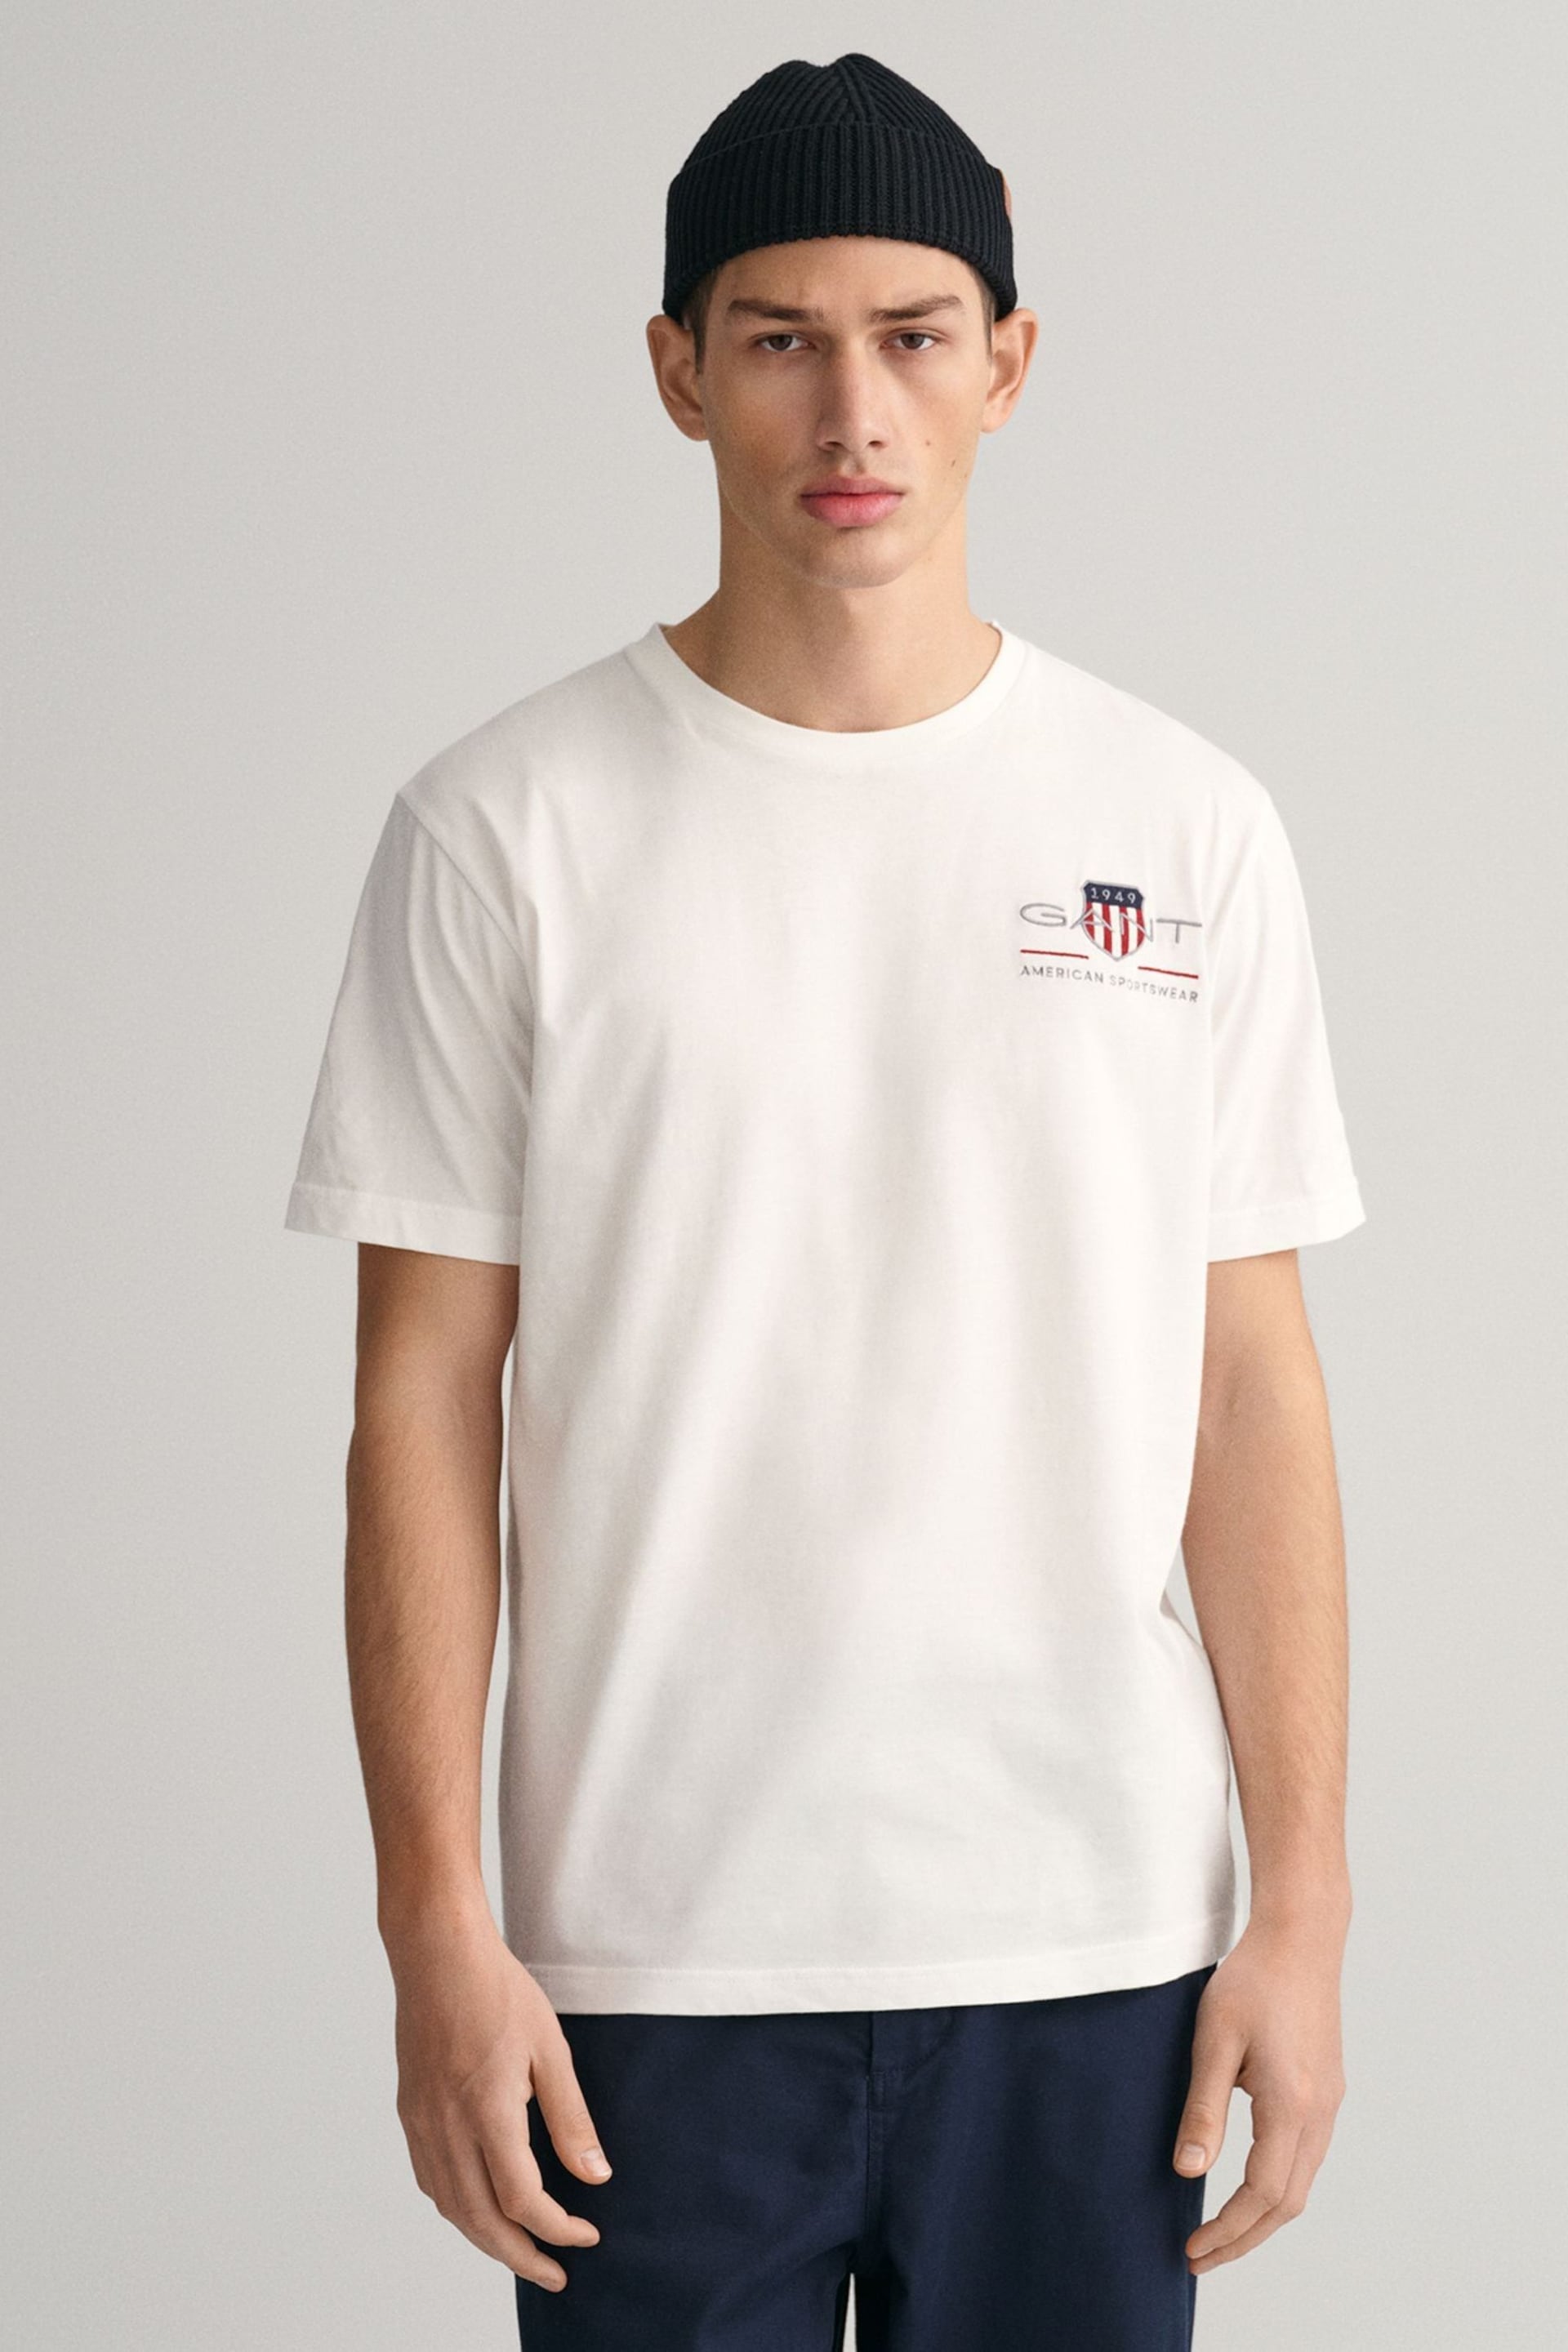 GANT White Embroidered Archive Shield T-Shirt - Image 1 of 4